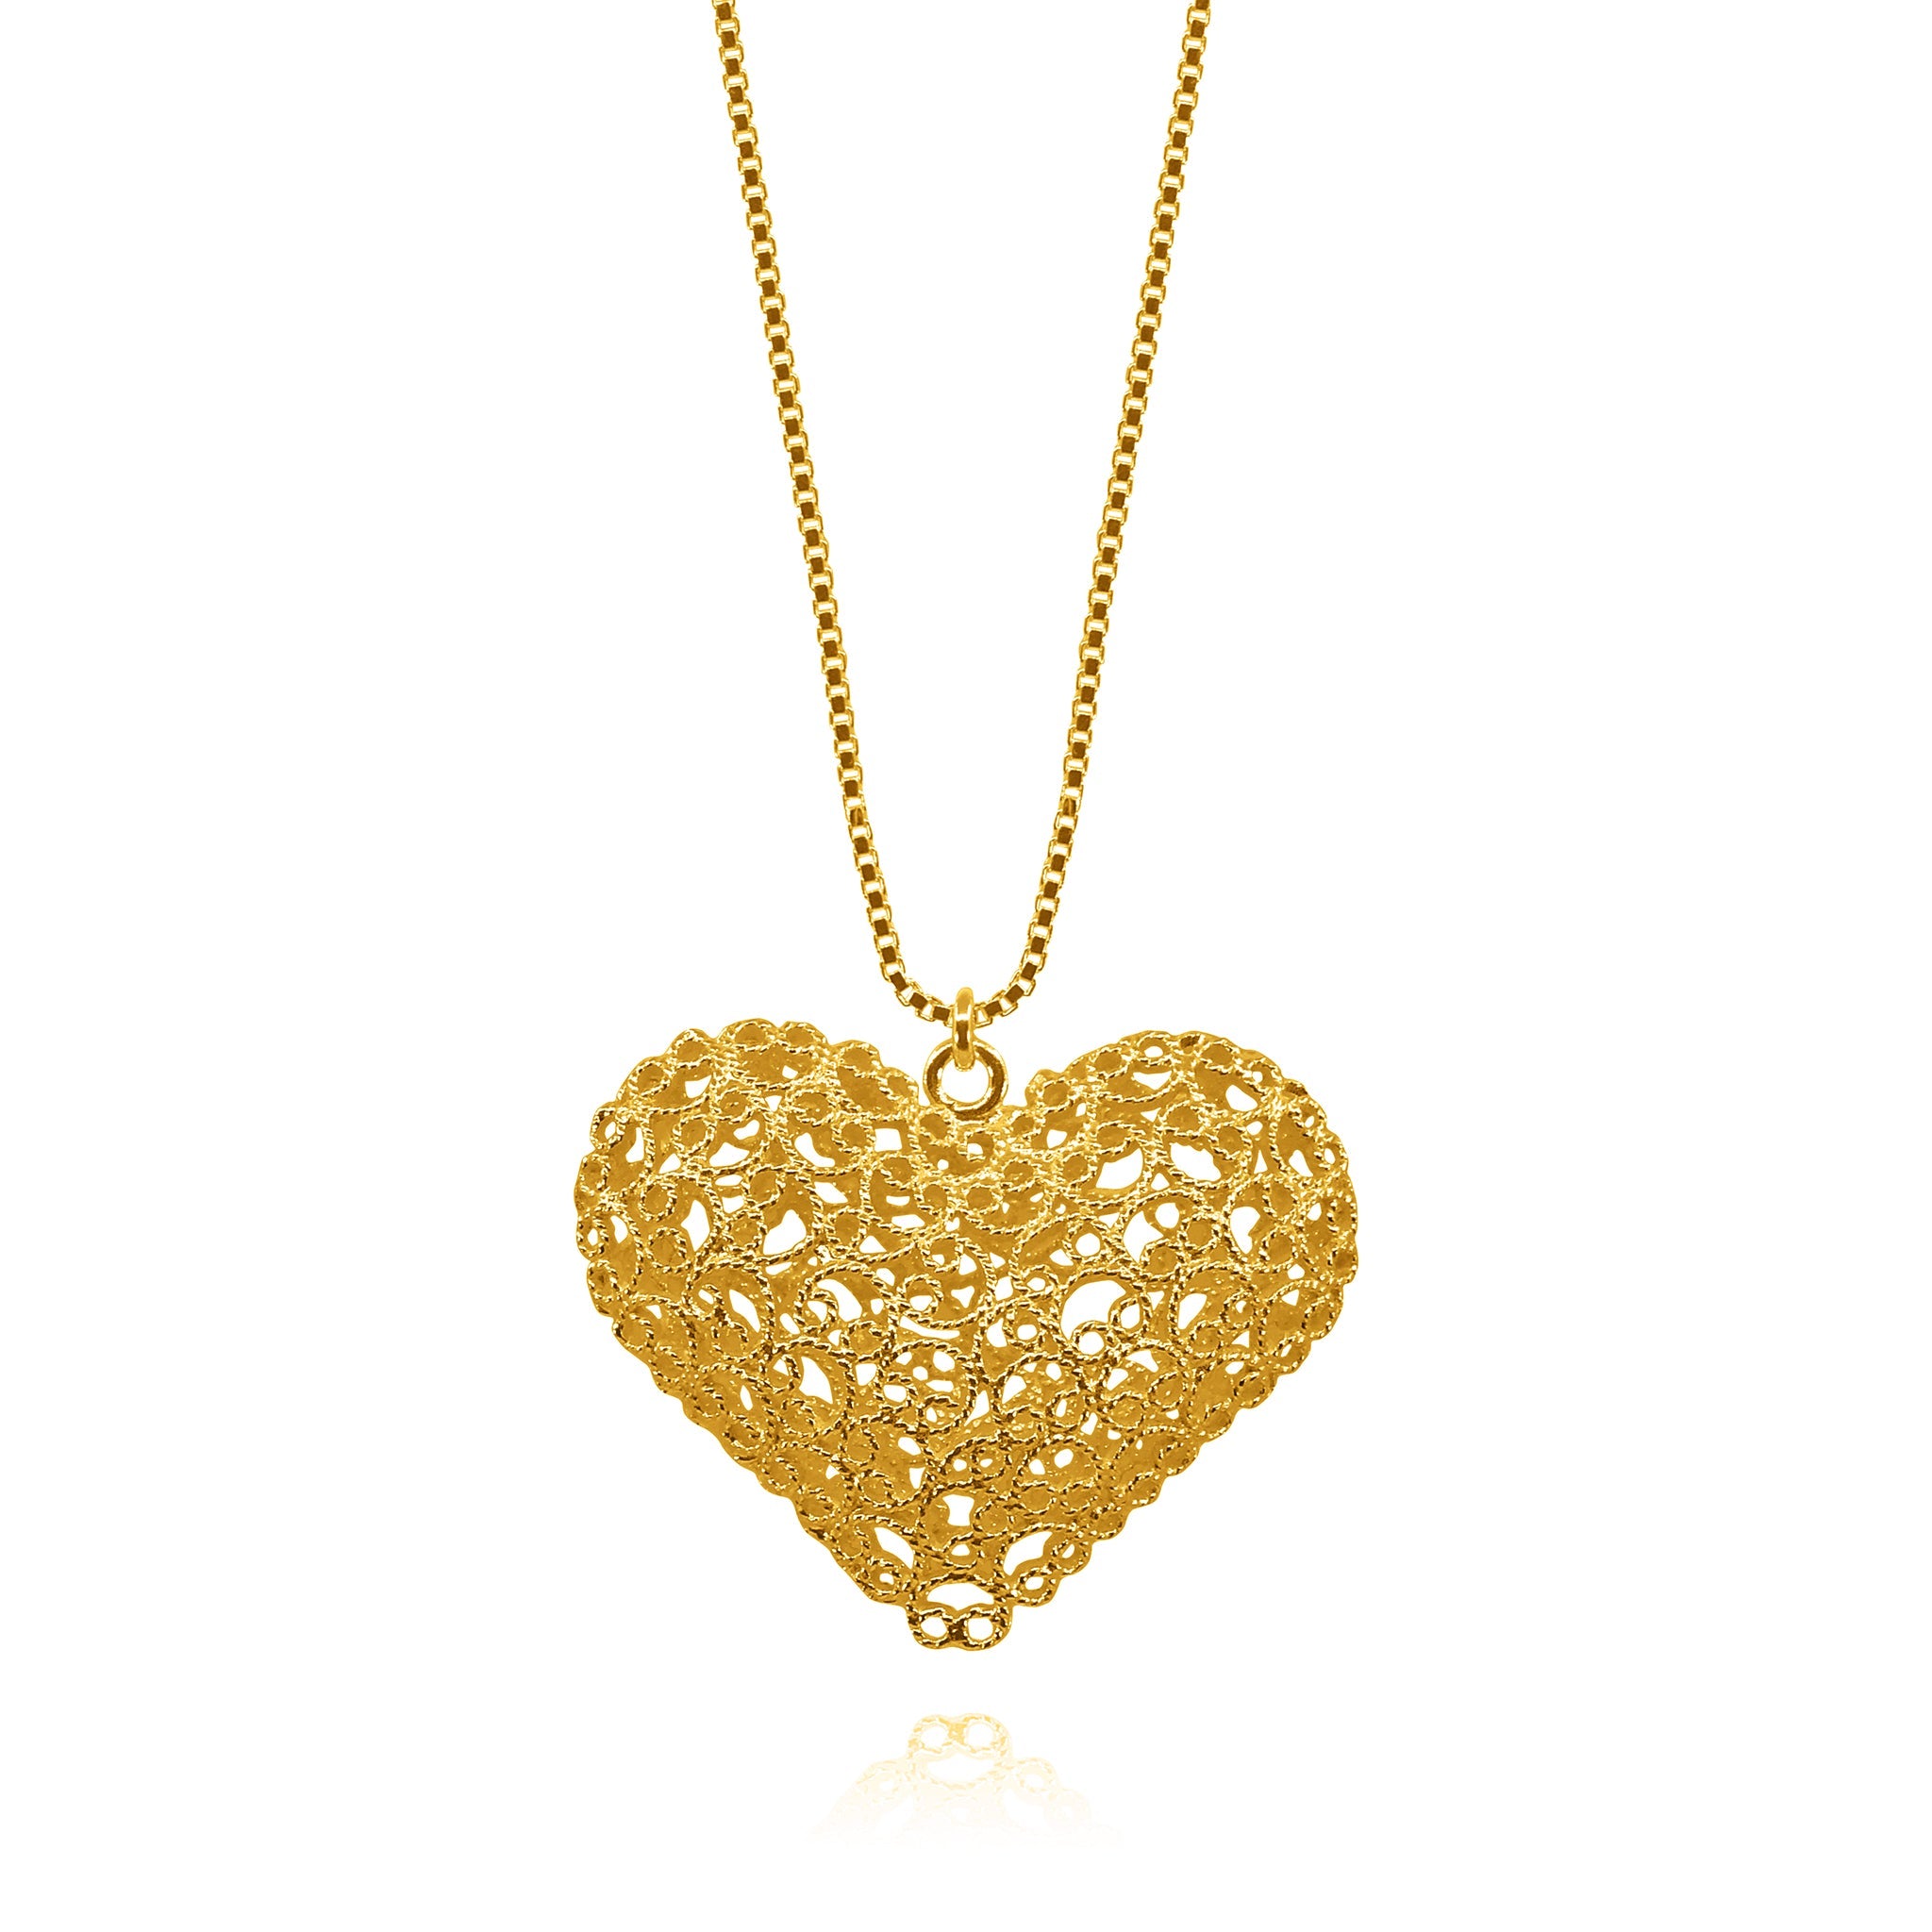 KATE GOLD HEARTS SMALL PENDANT NECKLACE FILIGREE